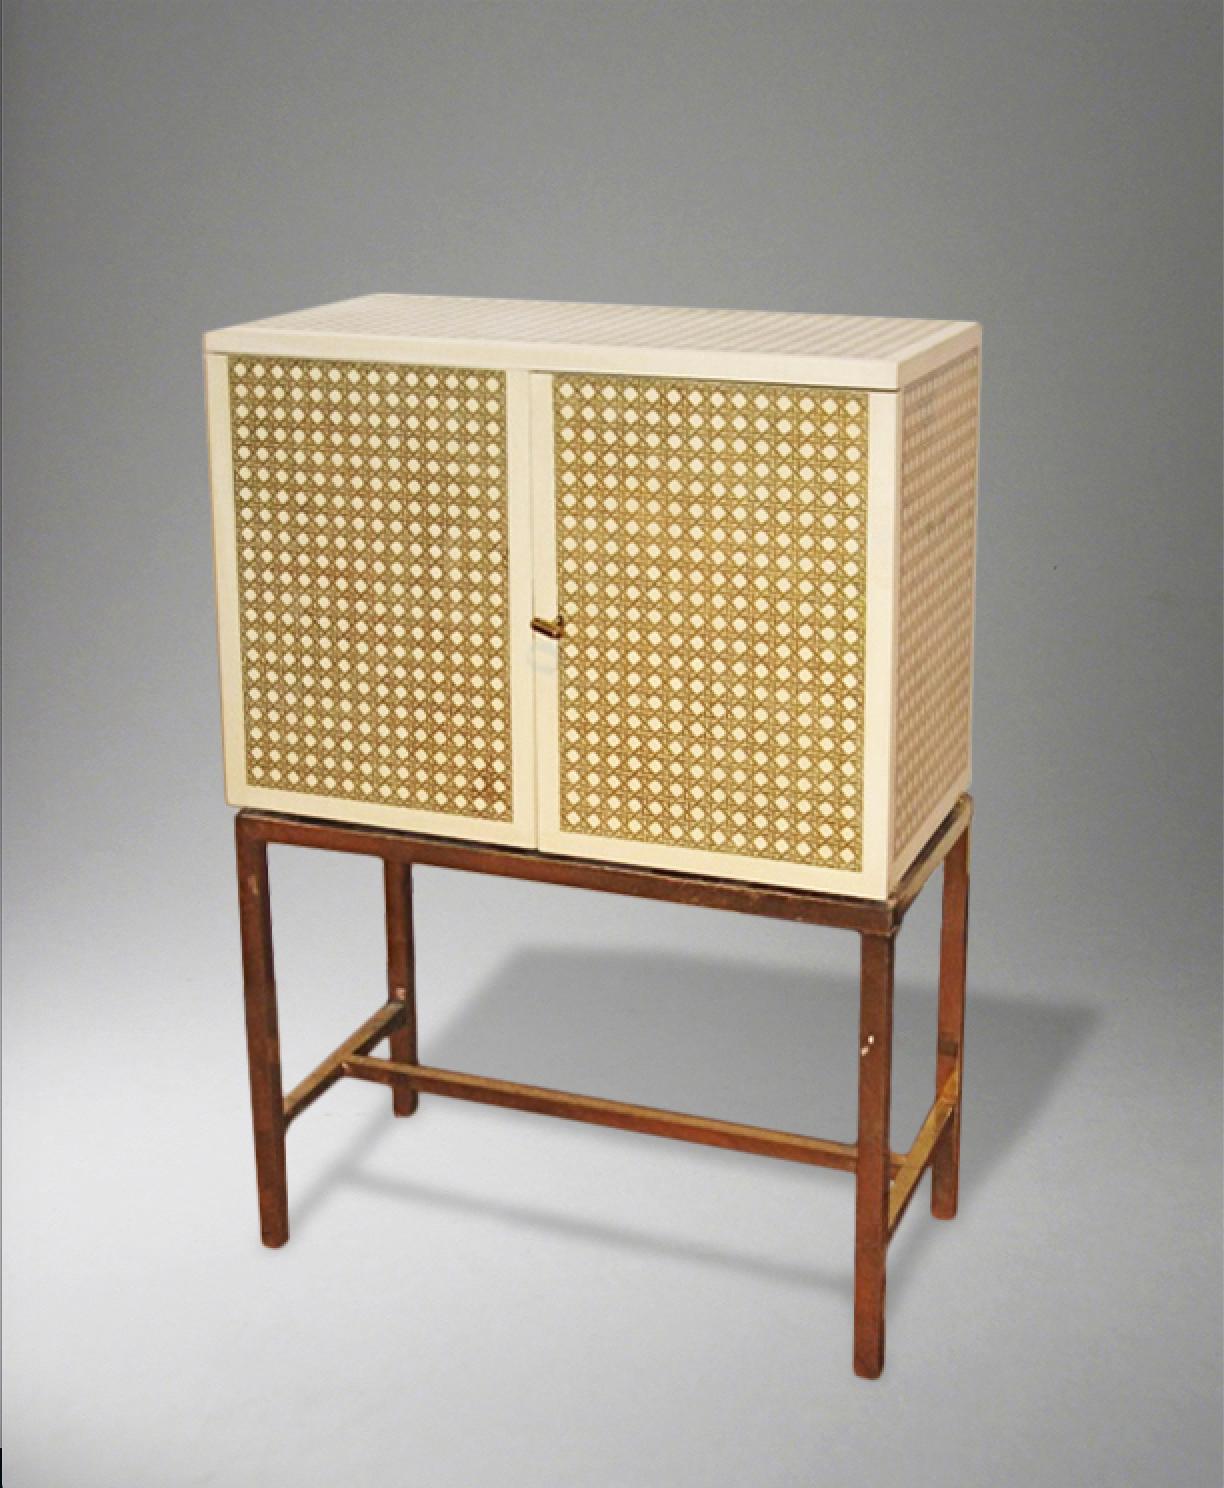 Mid-20th Century 'Trellis' Cabinet on Stand, by Piero Fornasetti, 1950s